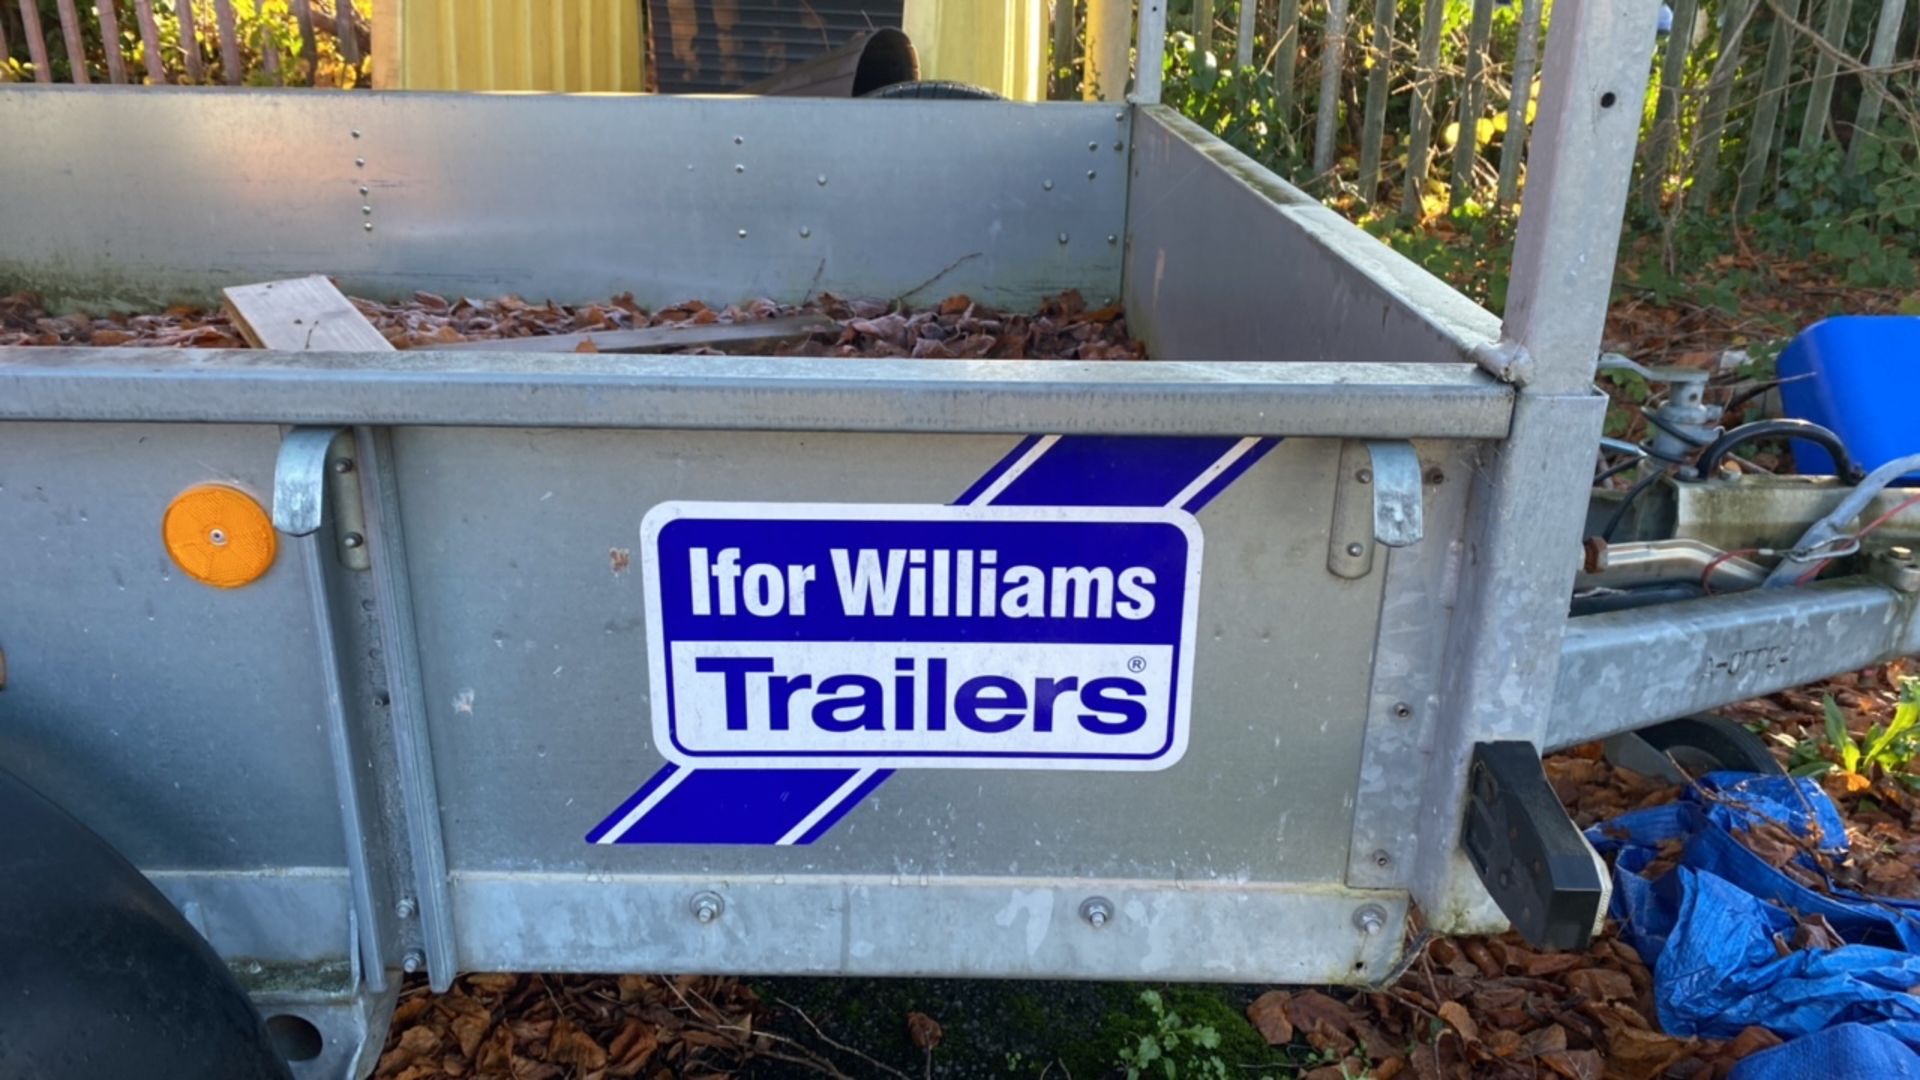 Ifor Williams Trailer - Image 4 of 14